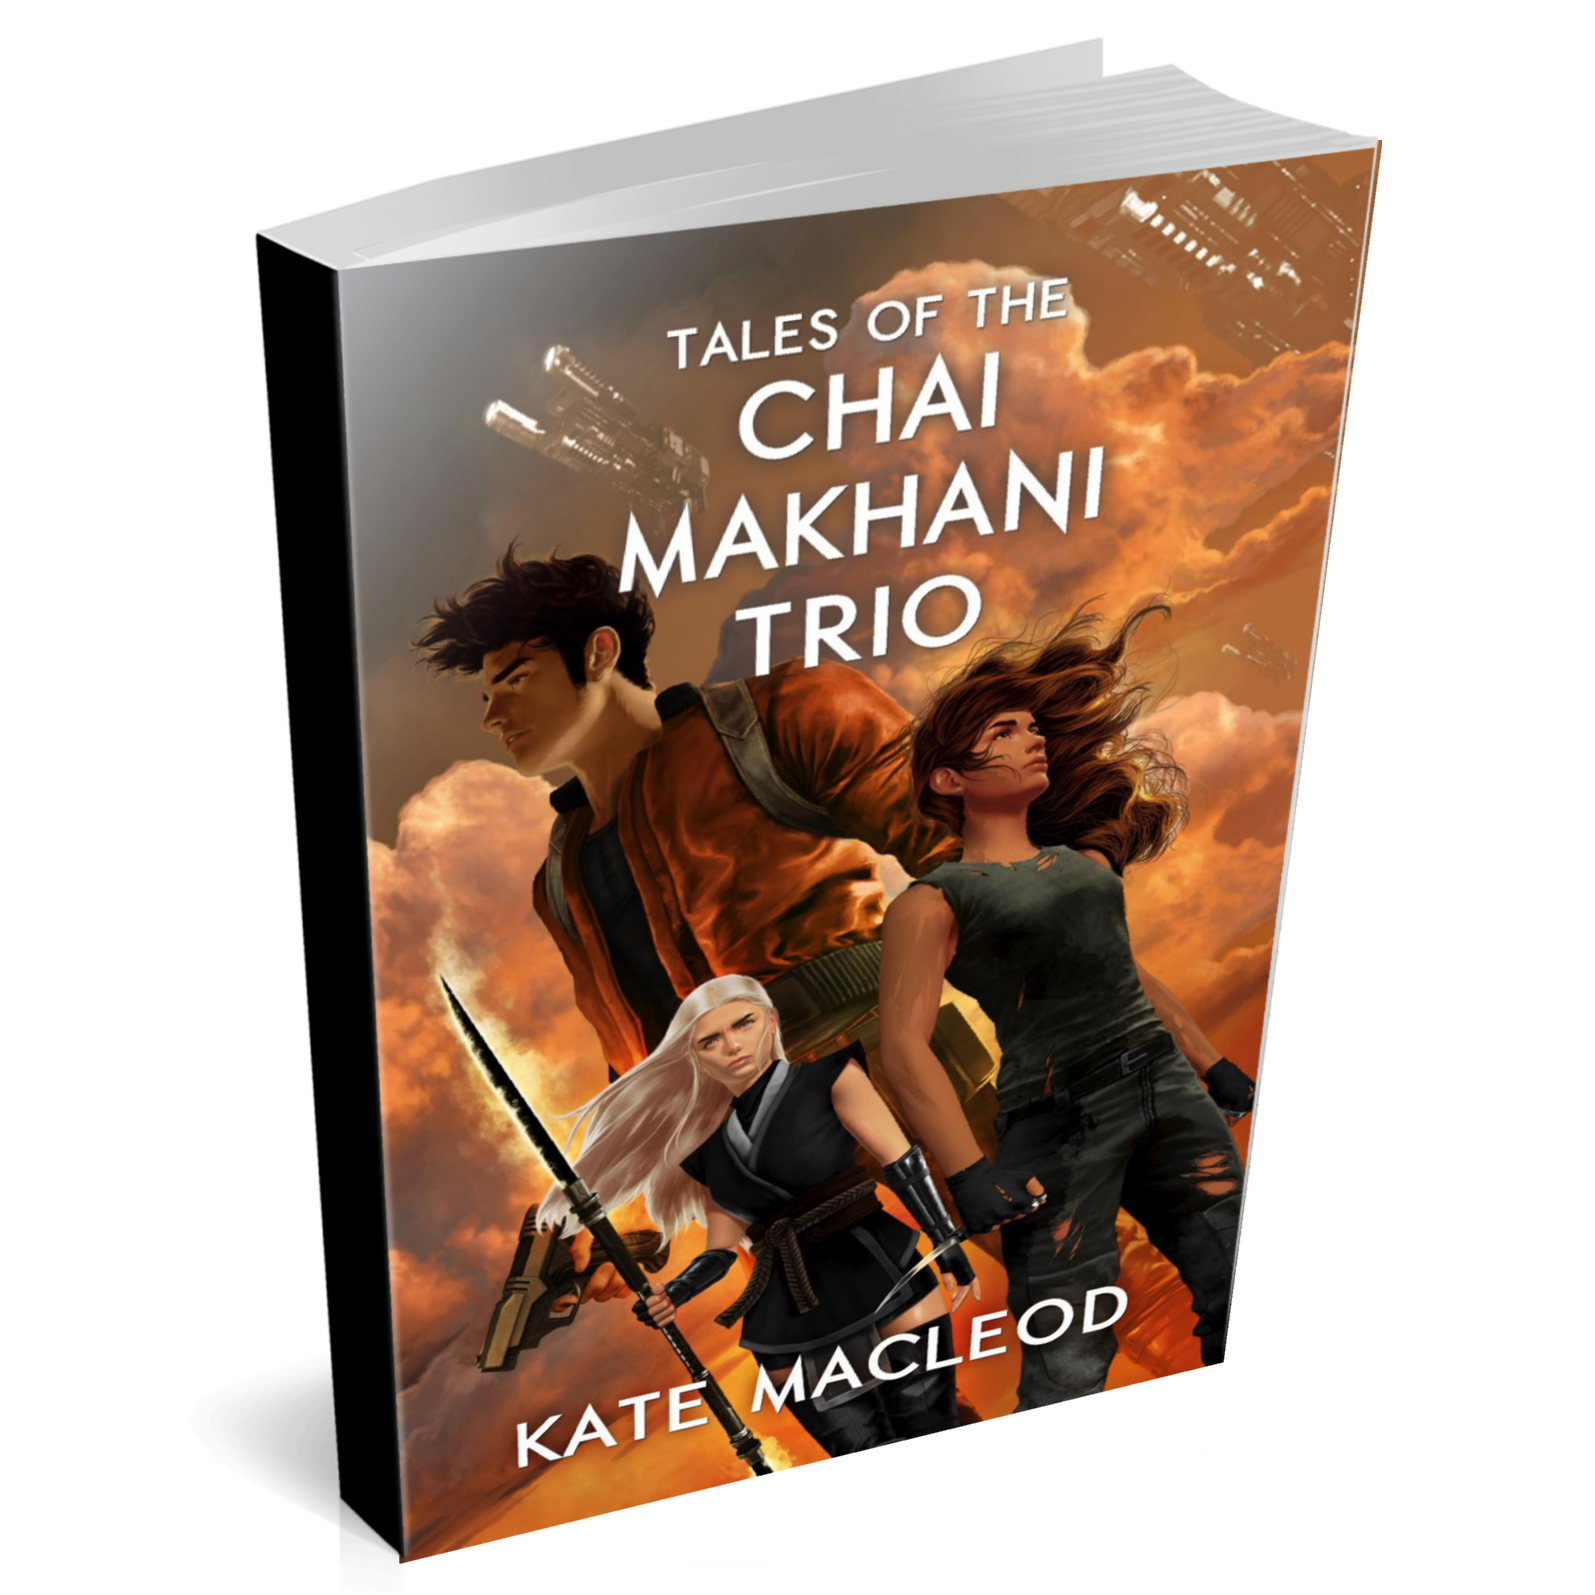 Cover to the paperback of the young adult science fiction novel Tales of the Chai Makhani Trio.